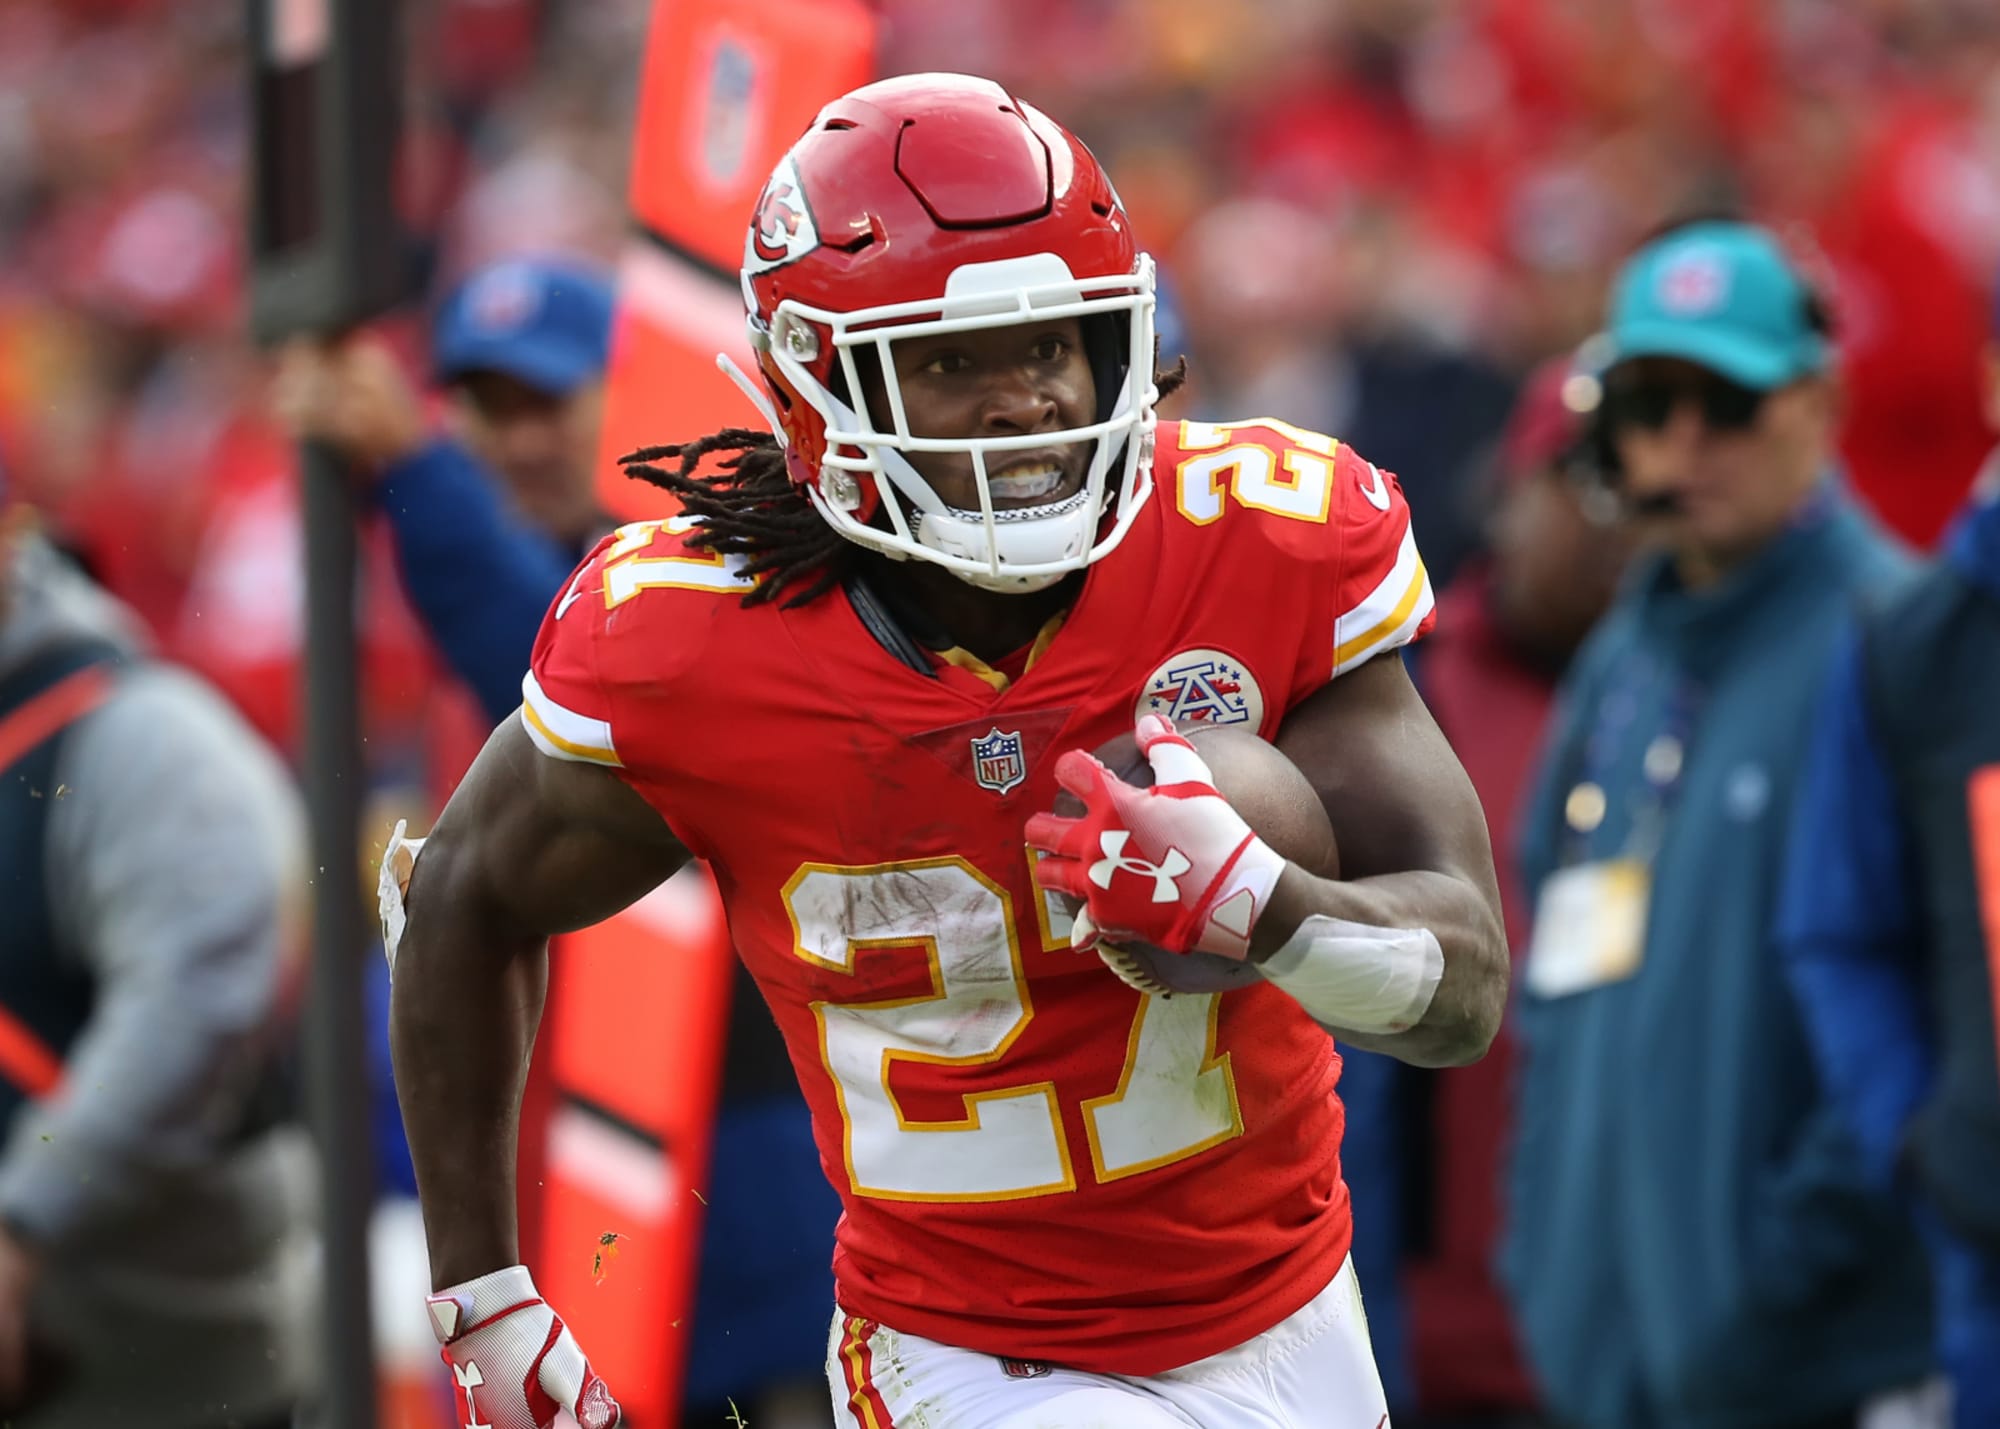 Kansas City Chiefs: Kareem Hunt signs with Cleveland Browns